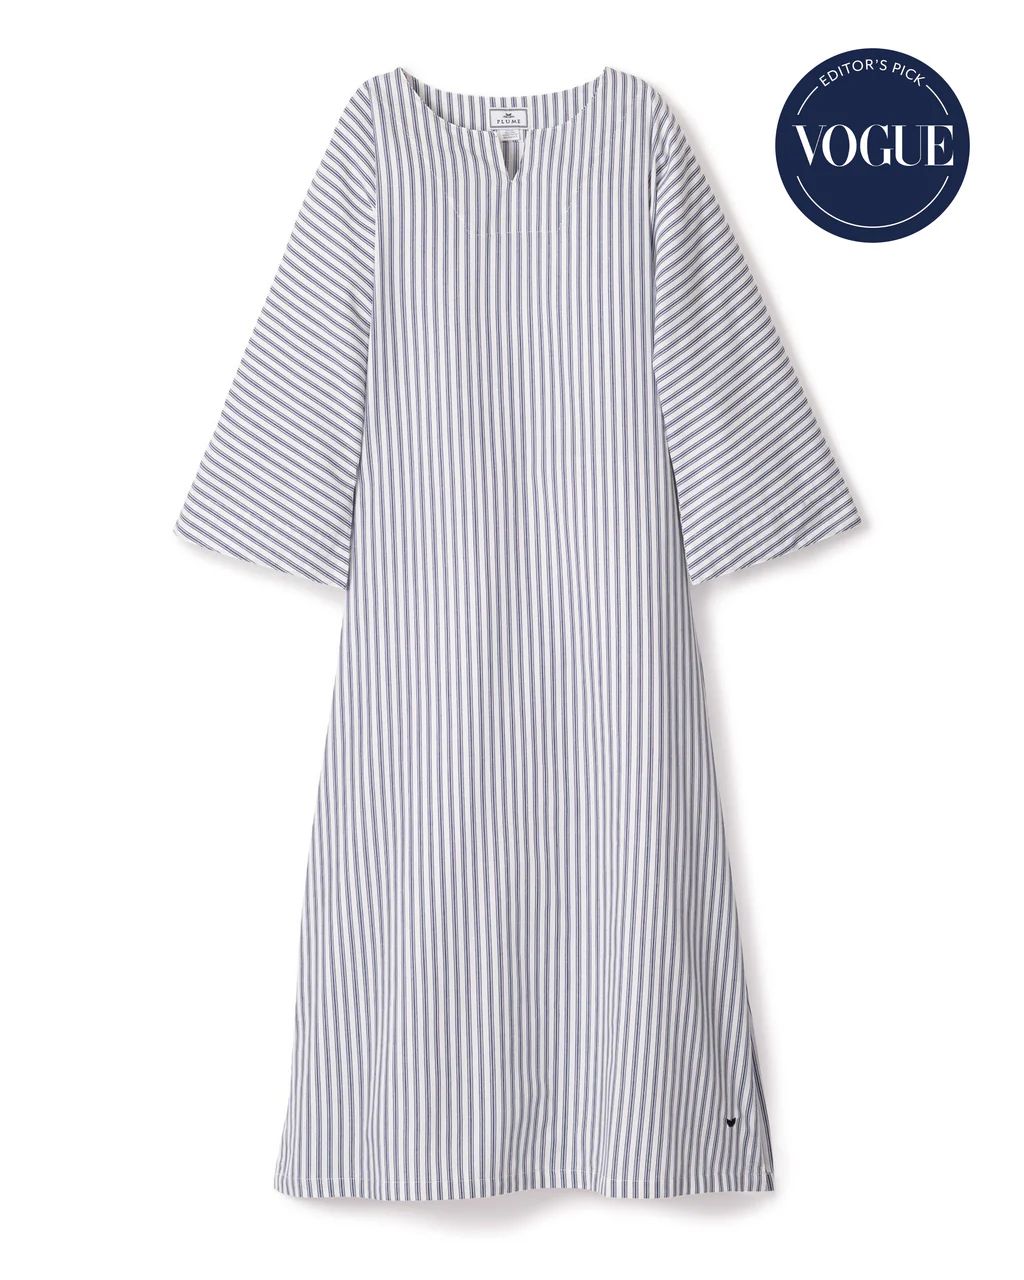 Women's Twill Caftan in Navy French Ticking | Petite Plume